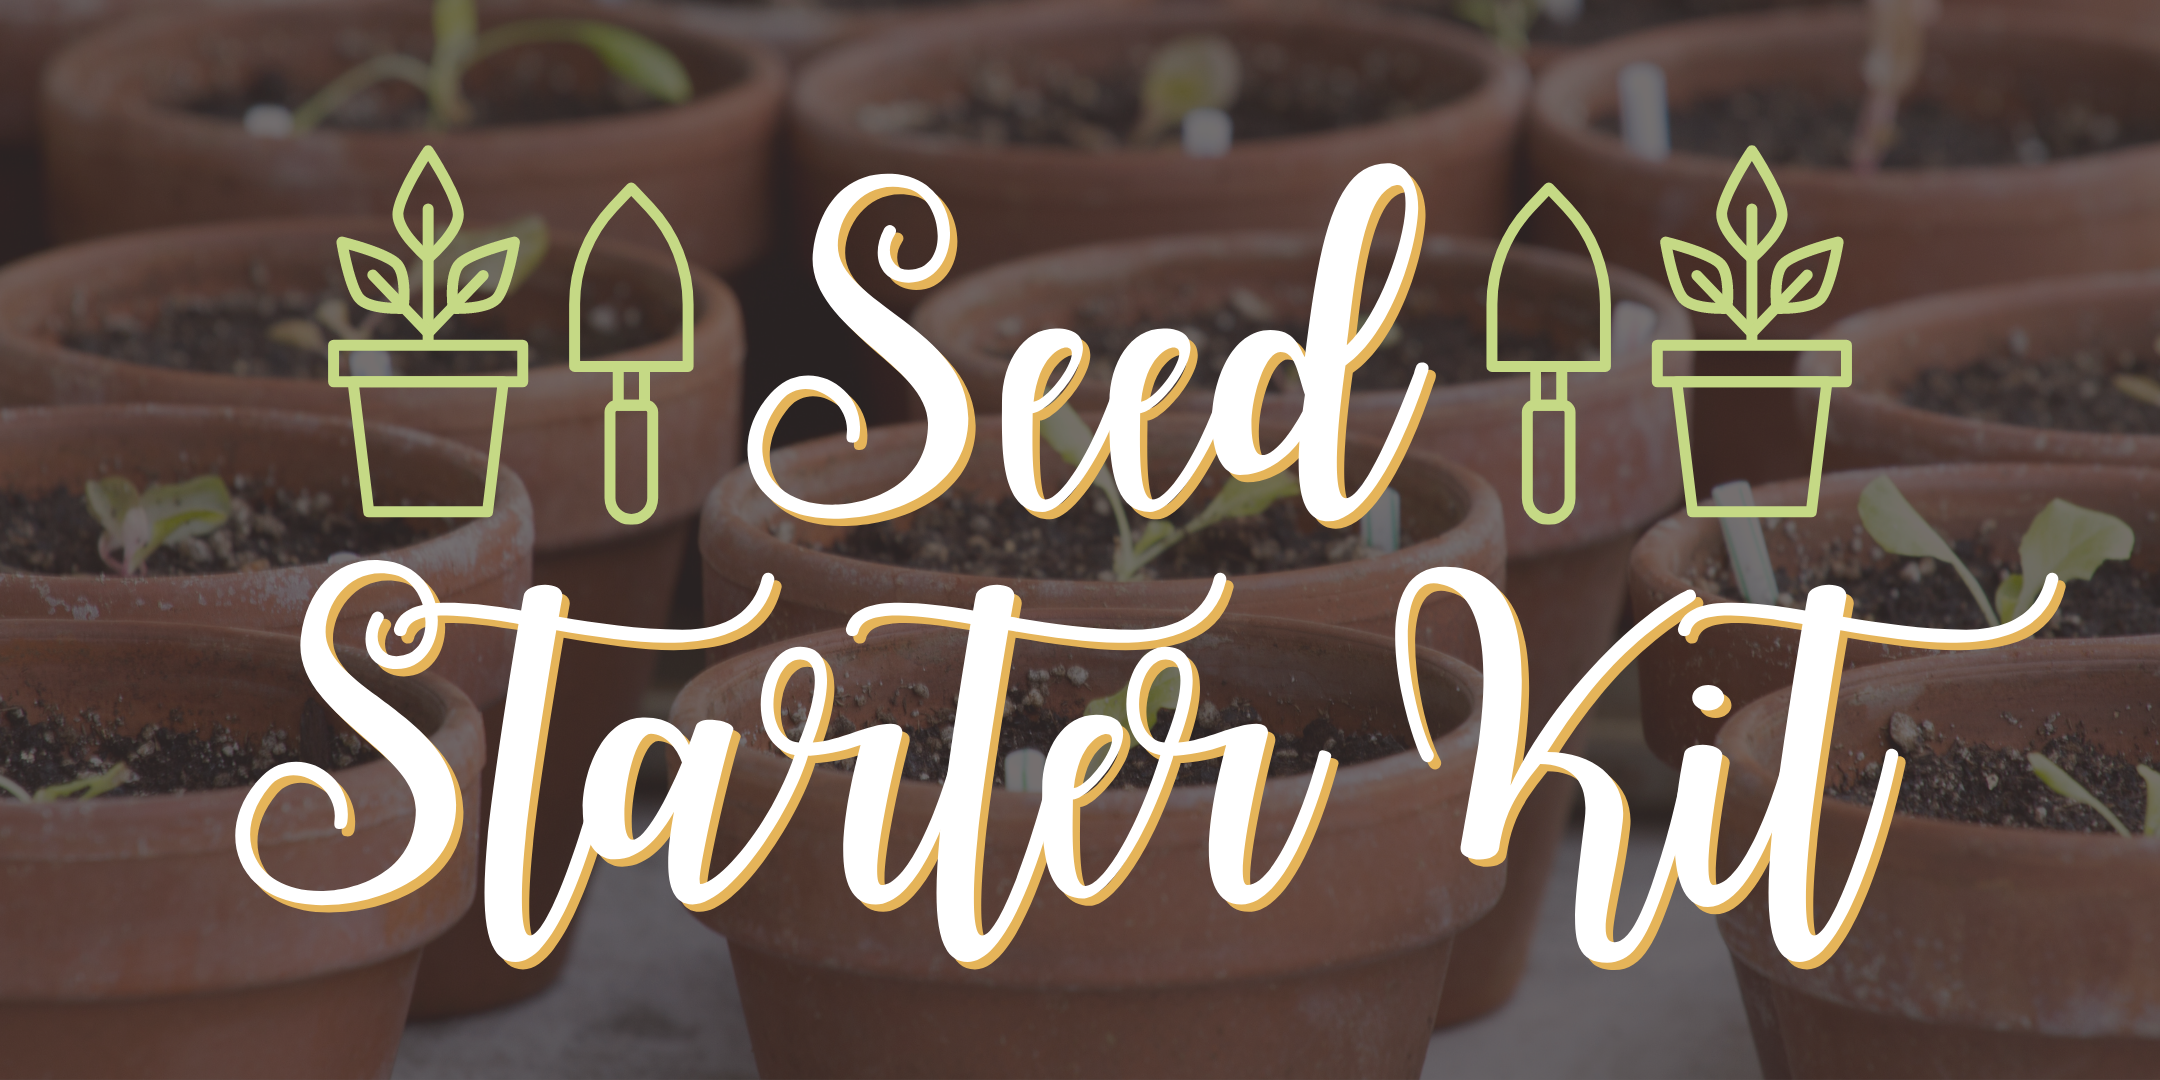 Seed Starter Kit image with seeds started in pots in the background